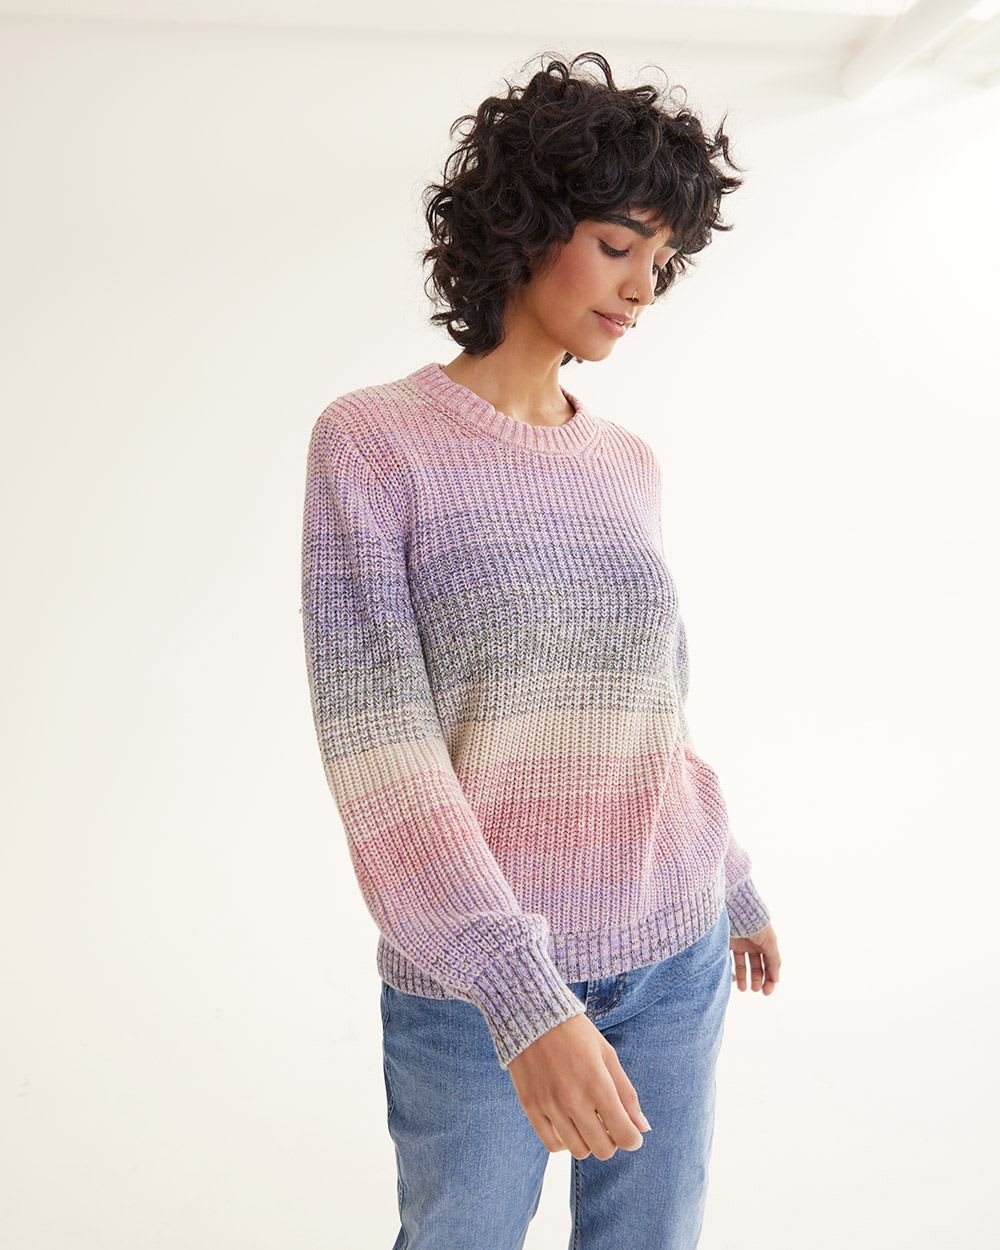 Long-Sleeve Crew-Neck Pullover